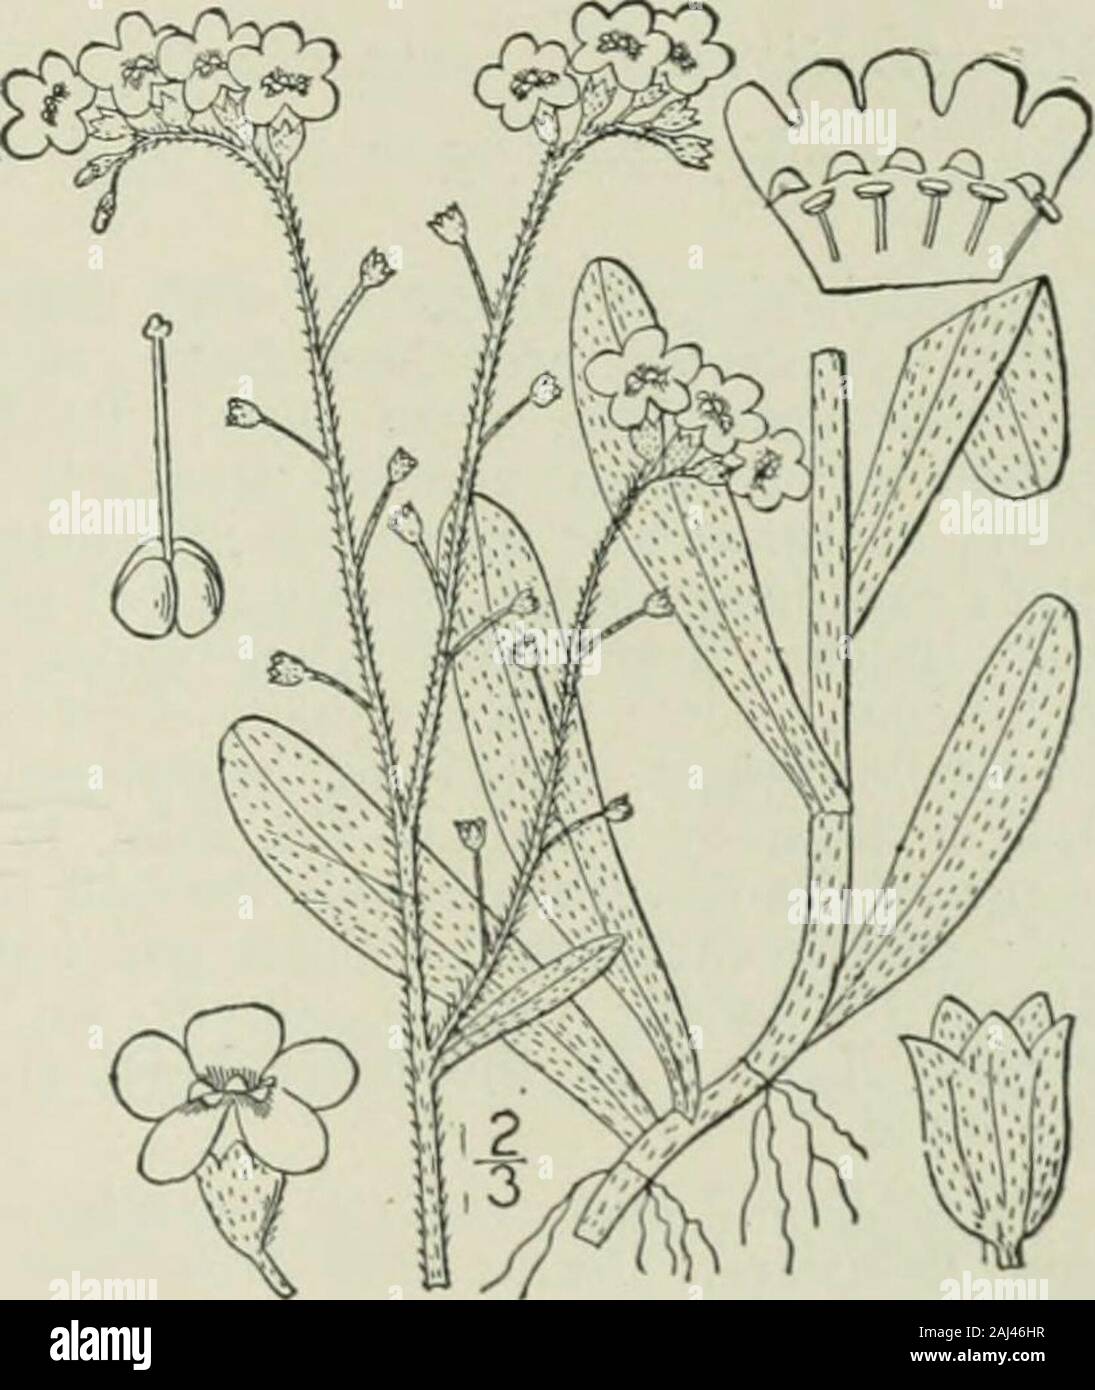 An illustrated flora of the northern United States, Canada and the British possessions : from Newfoundland to the parallel of the southern boundary of Virginia and from the Atlantic Ocean westward to the 102nd meridian . 6. M.virginica. I. Myosotis scorpioides L. Forg-et-me-not.Mouse-ear Scorpion-grass. Fig. 3529. Myosotis scorpioides a.r. pahistris L. Sp. PI. 131. 1753.Myosotis pahistris Lam. Fl. Fr. 2: 283. 1778. Appressed-pubescent, perennial, with slender root-stocks or stolons; stems slender, decumbent or as-cending, rooting at the lower nodes, 6-i8 long.Leaves oblong, oblanceolate or ob Stock Photo